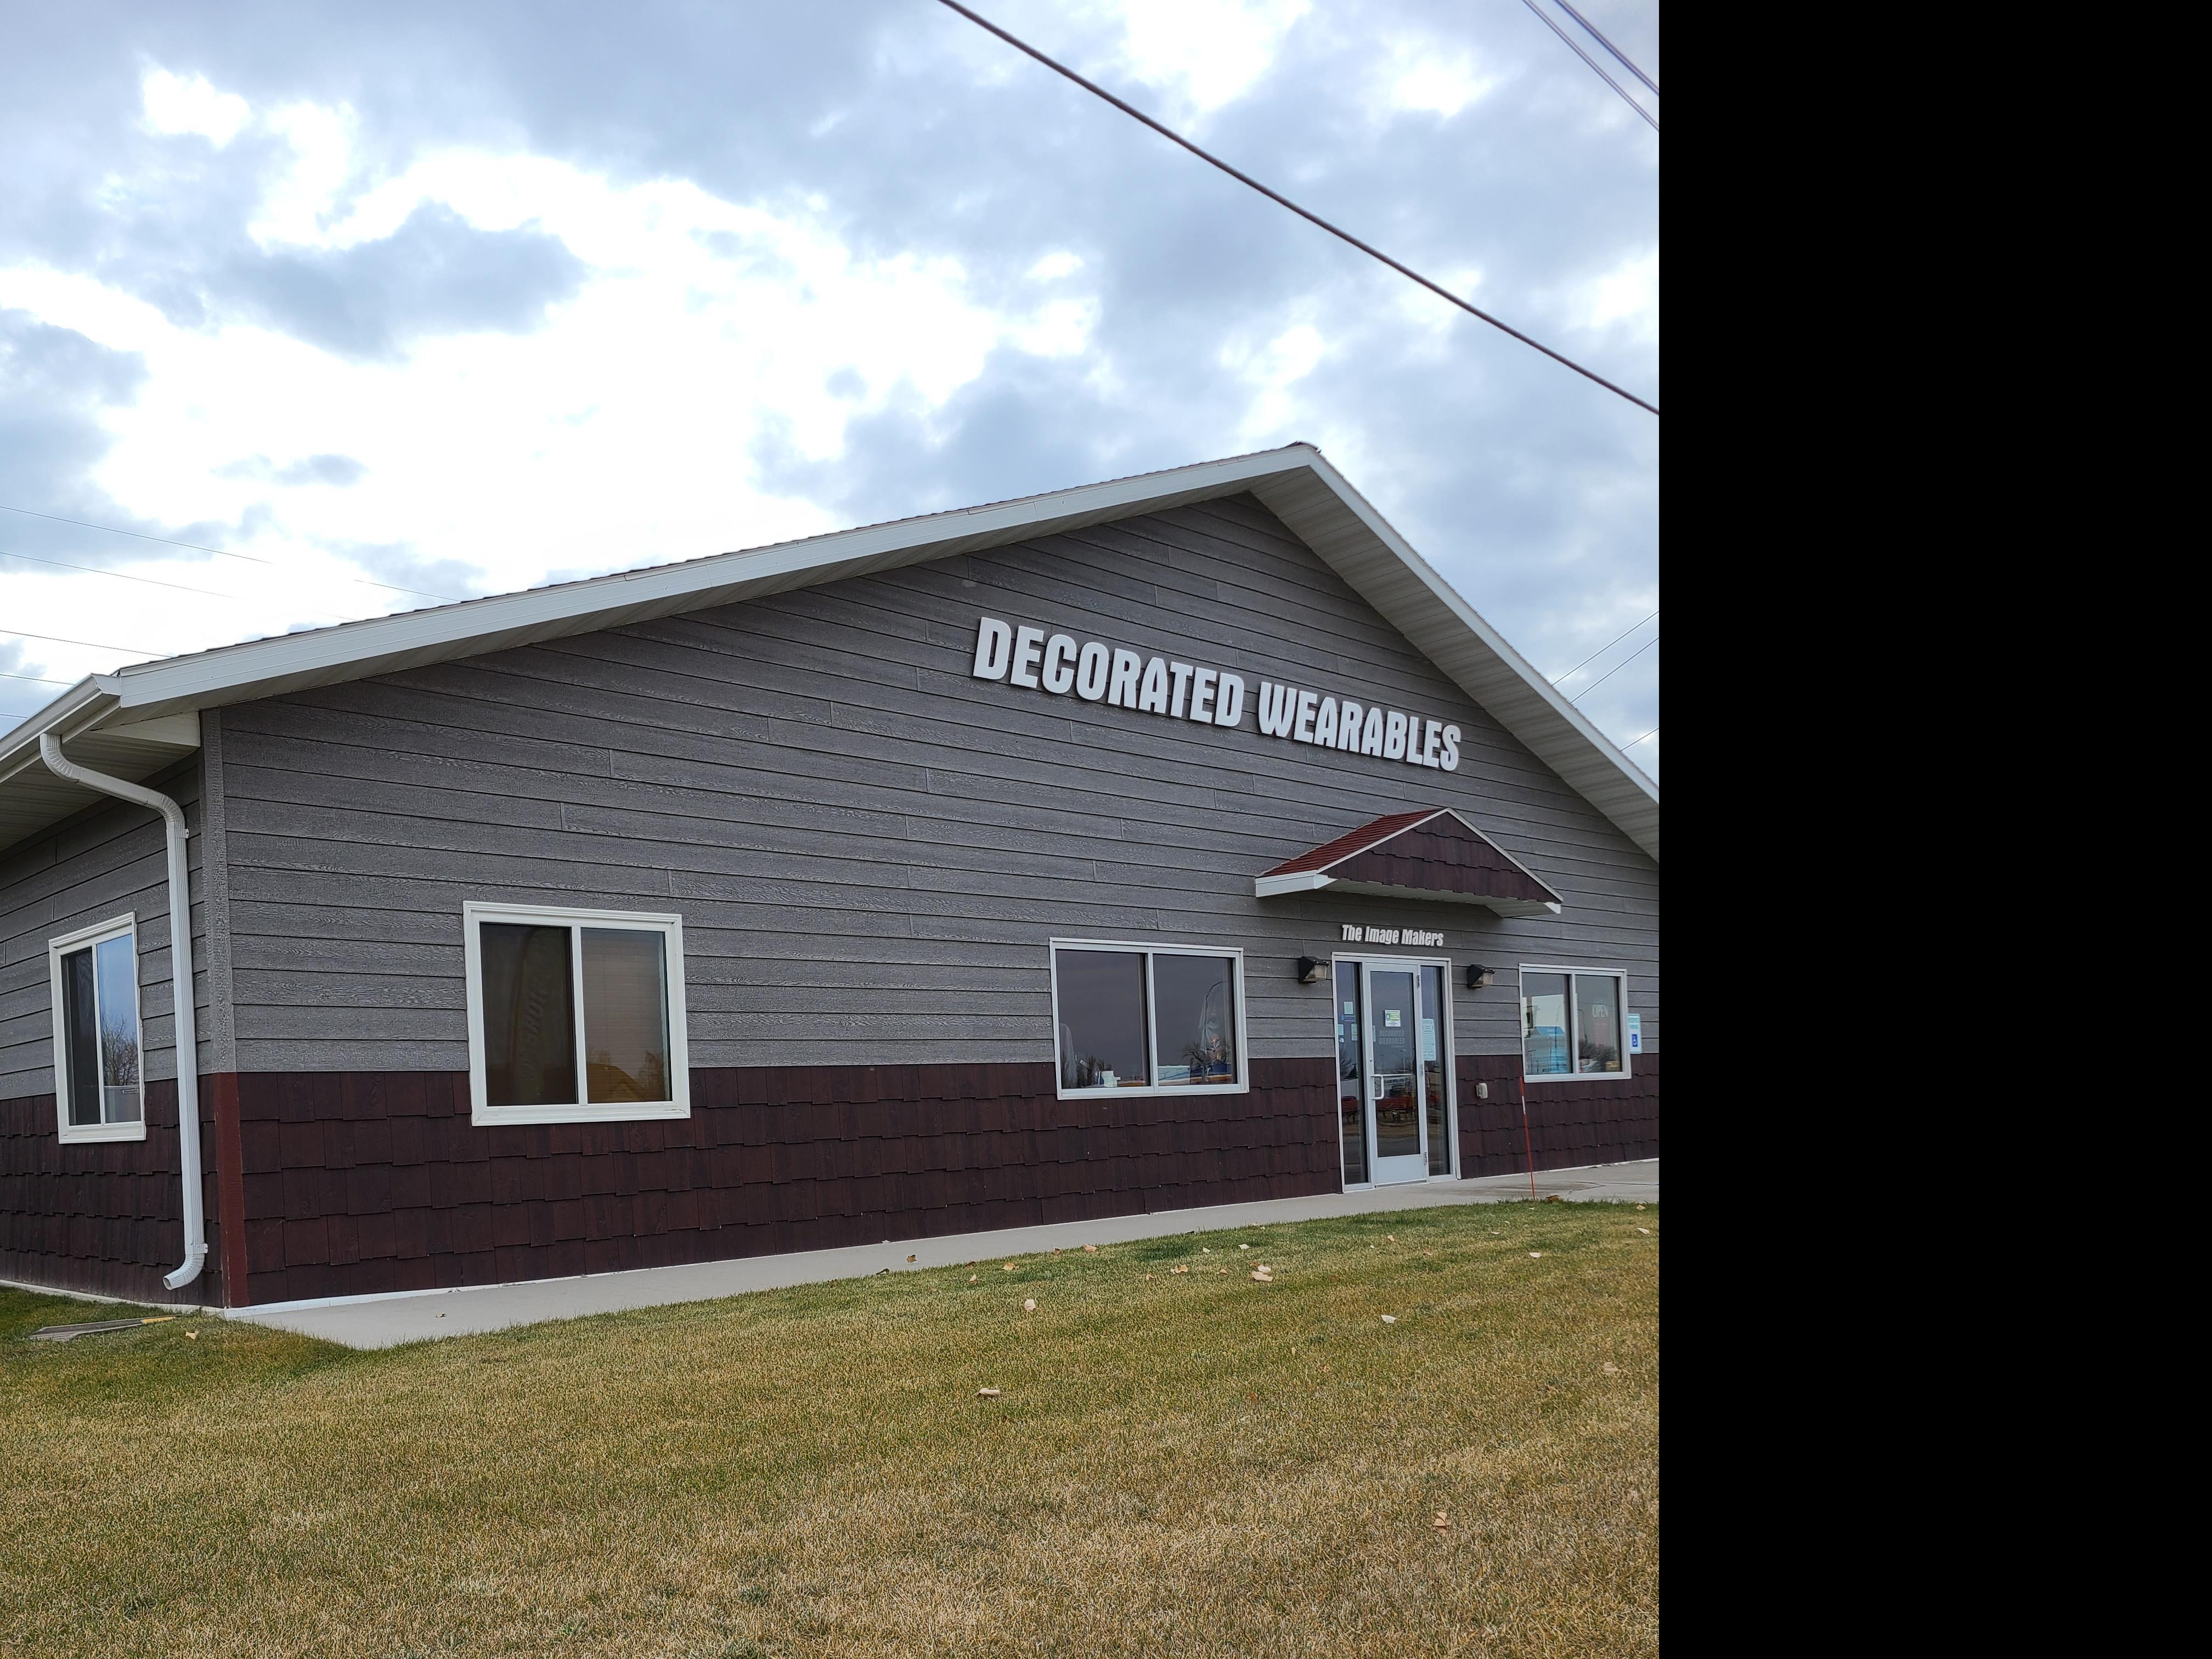 Tad Schmidt Builders takes pride in providing local businesses like Decorated Wearables with the commercial property of their dreams.